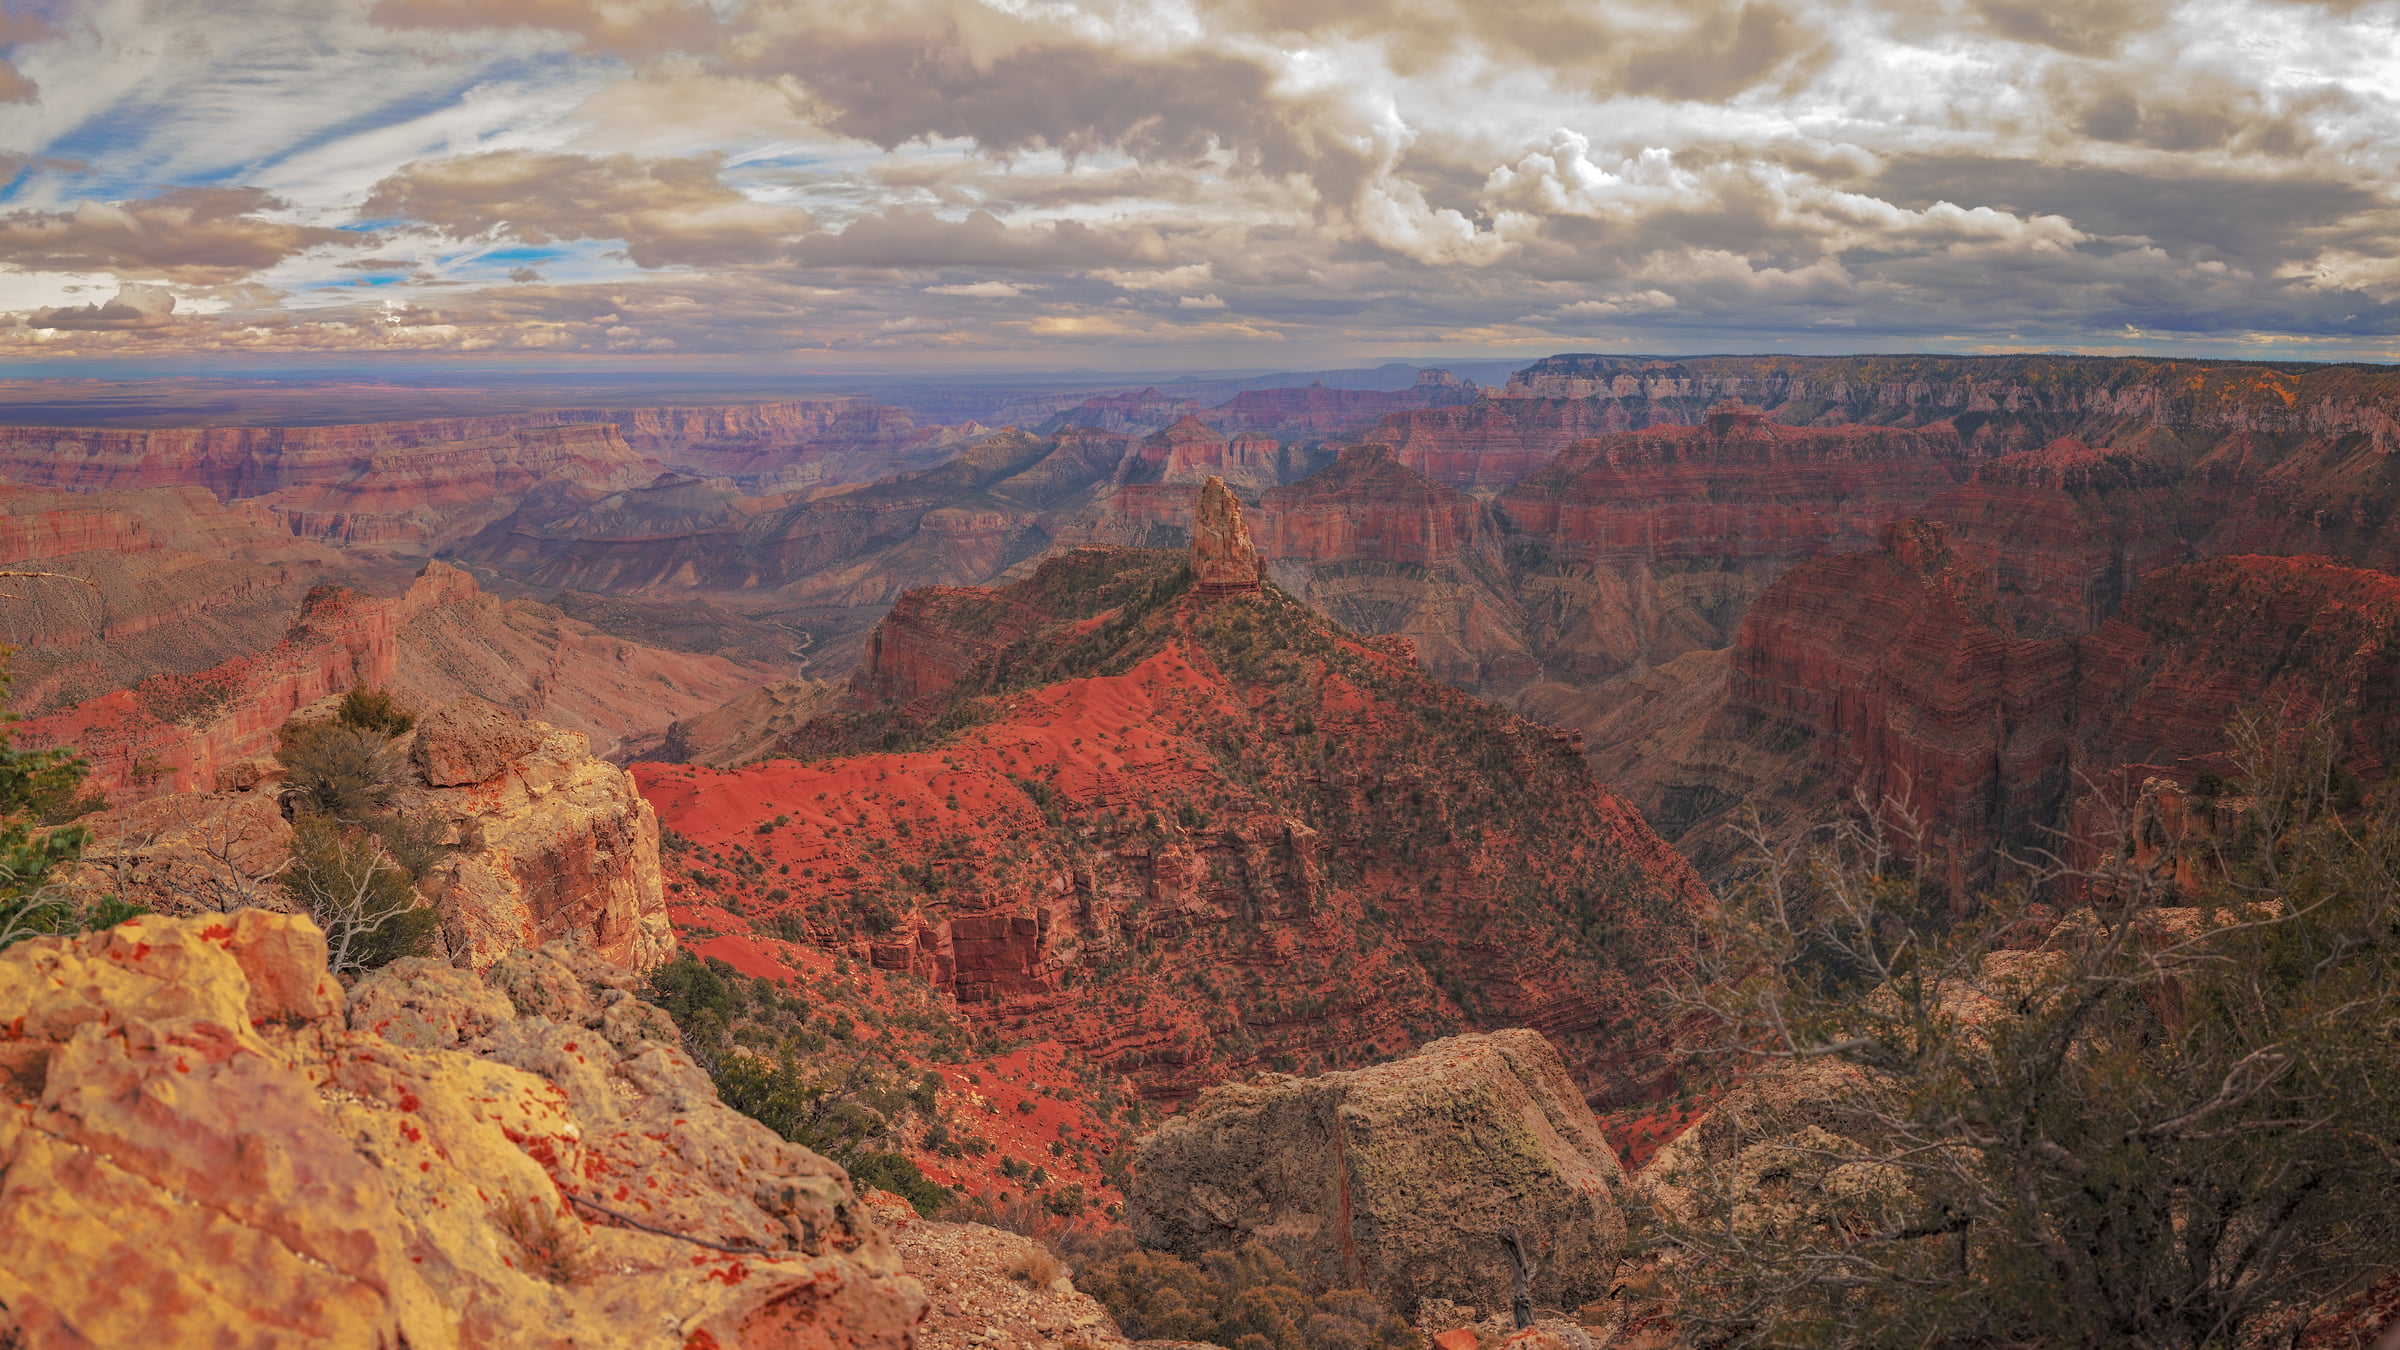 955 megapixels! A very high resolution, large-format VAST photo print of the Grand Canyon; landscape photograph created by John Freeman in Point Imperial, North Rim Grand Canyon, Arizona.